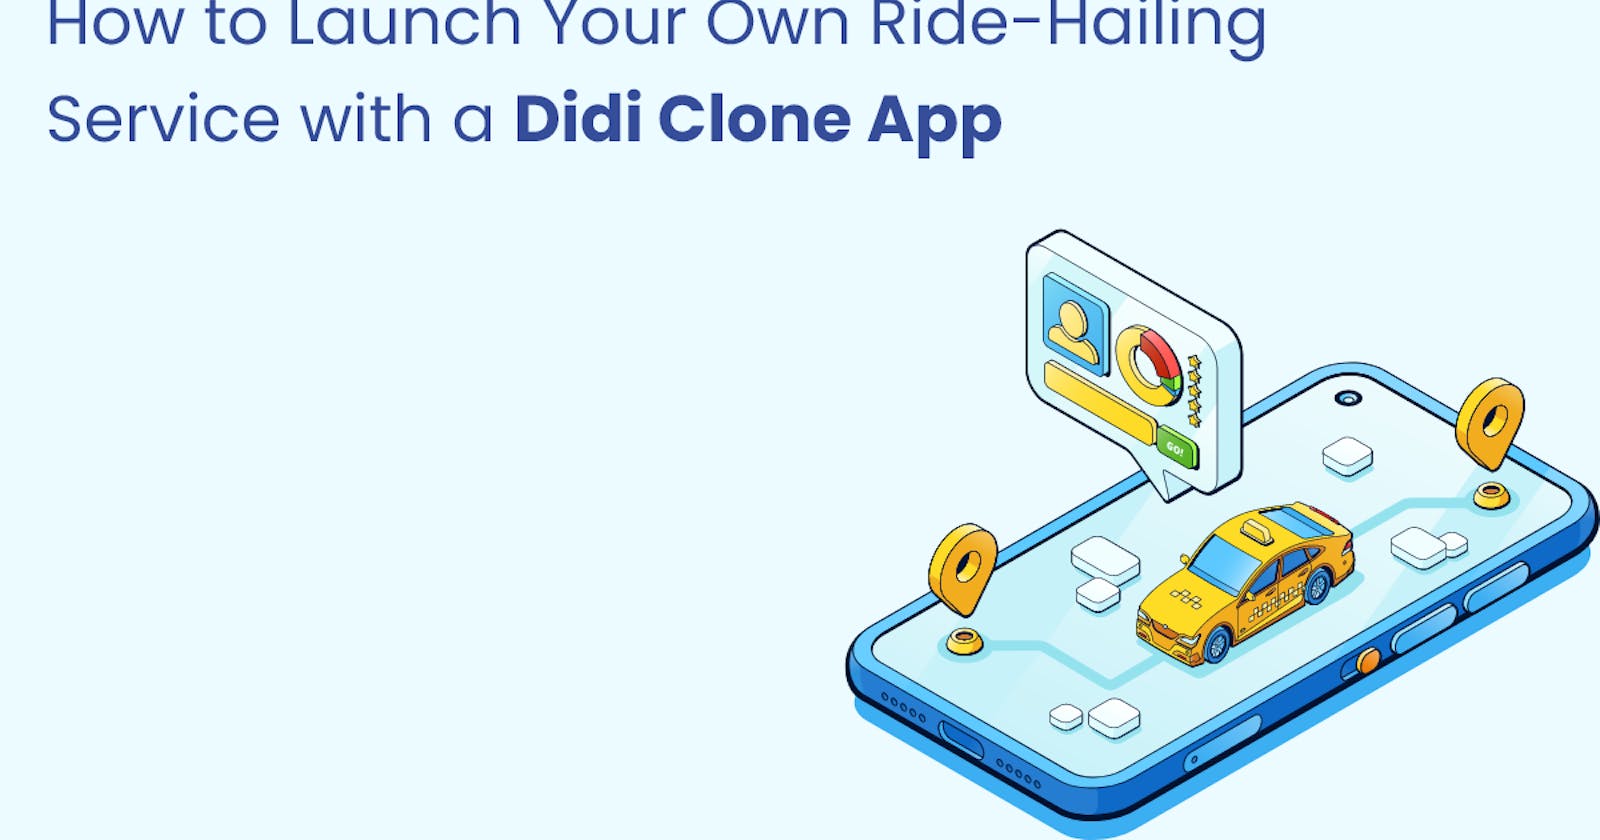 How to Launch Your Own Ride-Hailing Service with a Didi Clone App